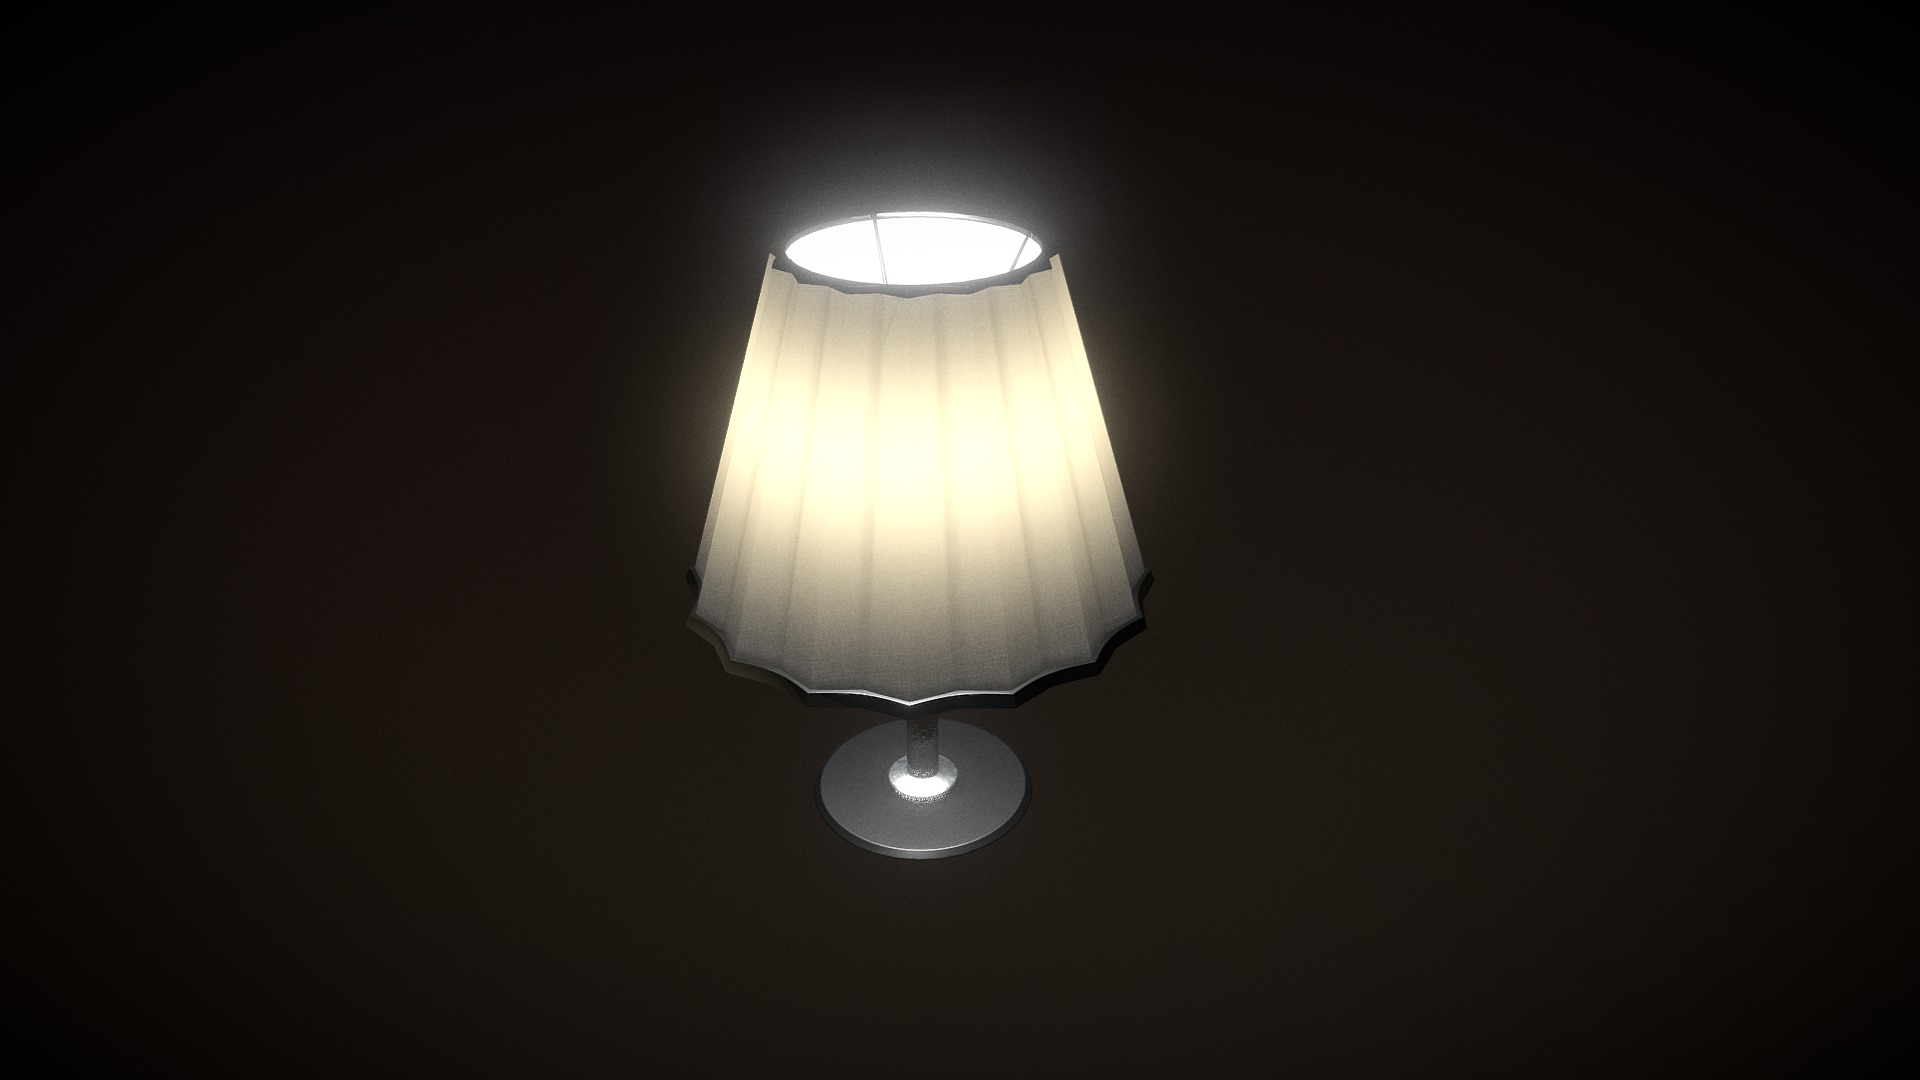 3D model Bedside Table Lamp 01 – Lit - This is a 3D model of the Bedside Table Lamp 01 - Lit. The 3D model is about a light fixture in a dark room.